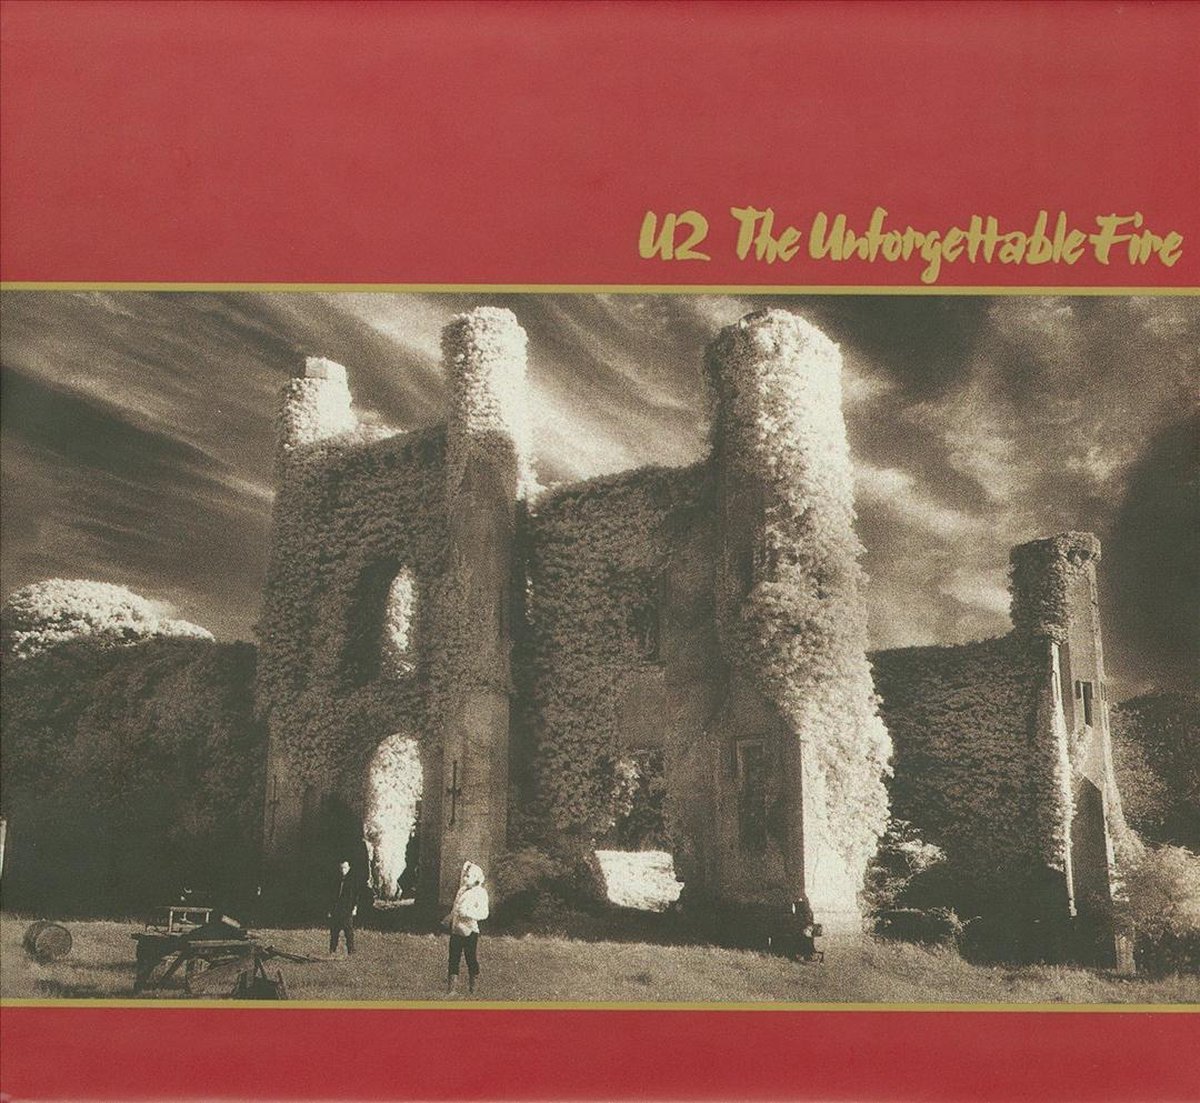 The Unforgettable Fire (Deluxe Edition) - U2